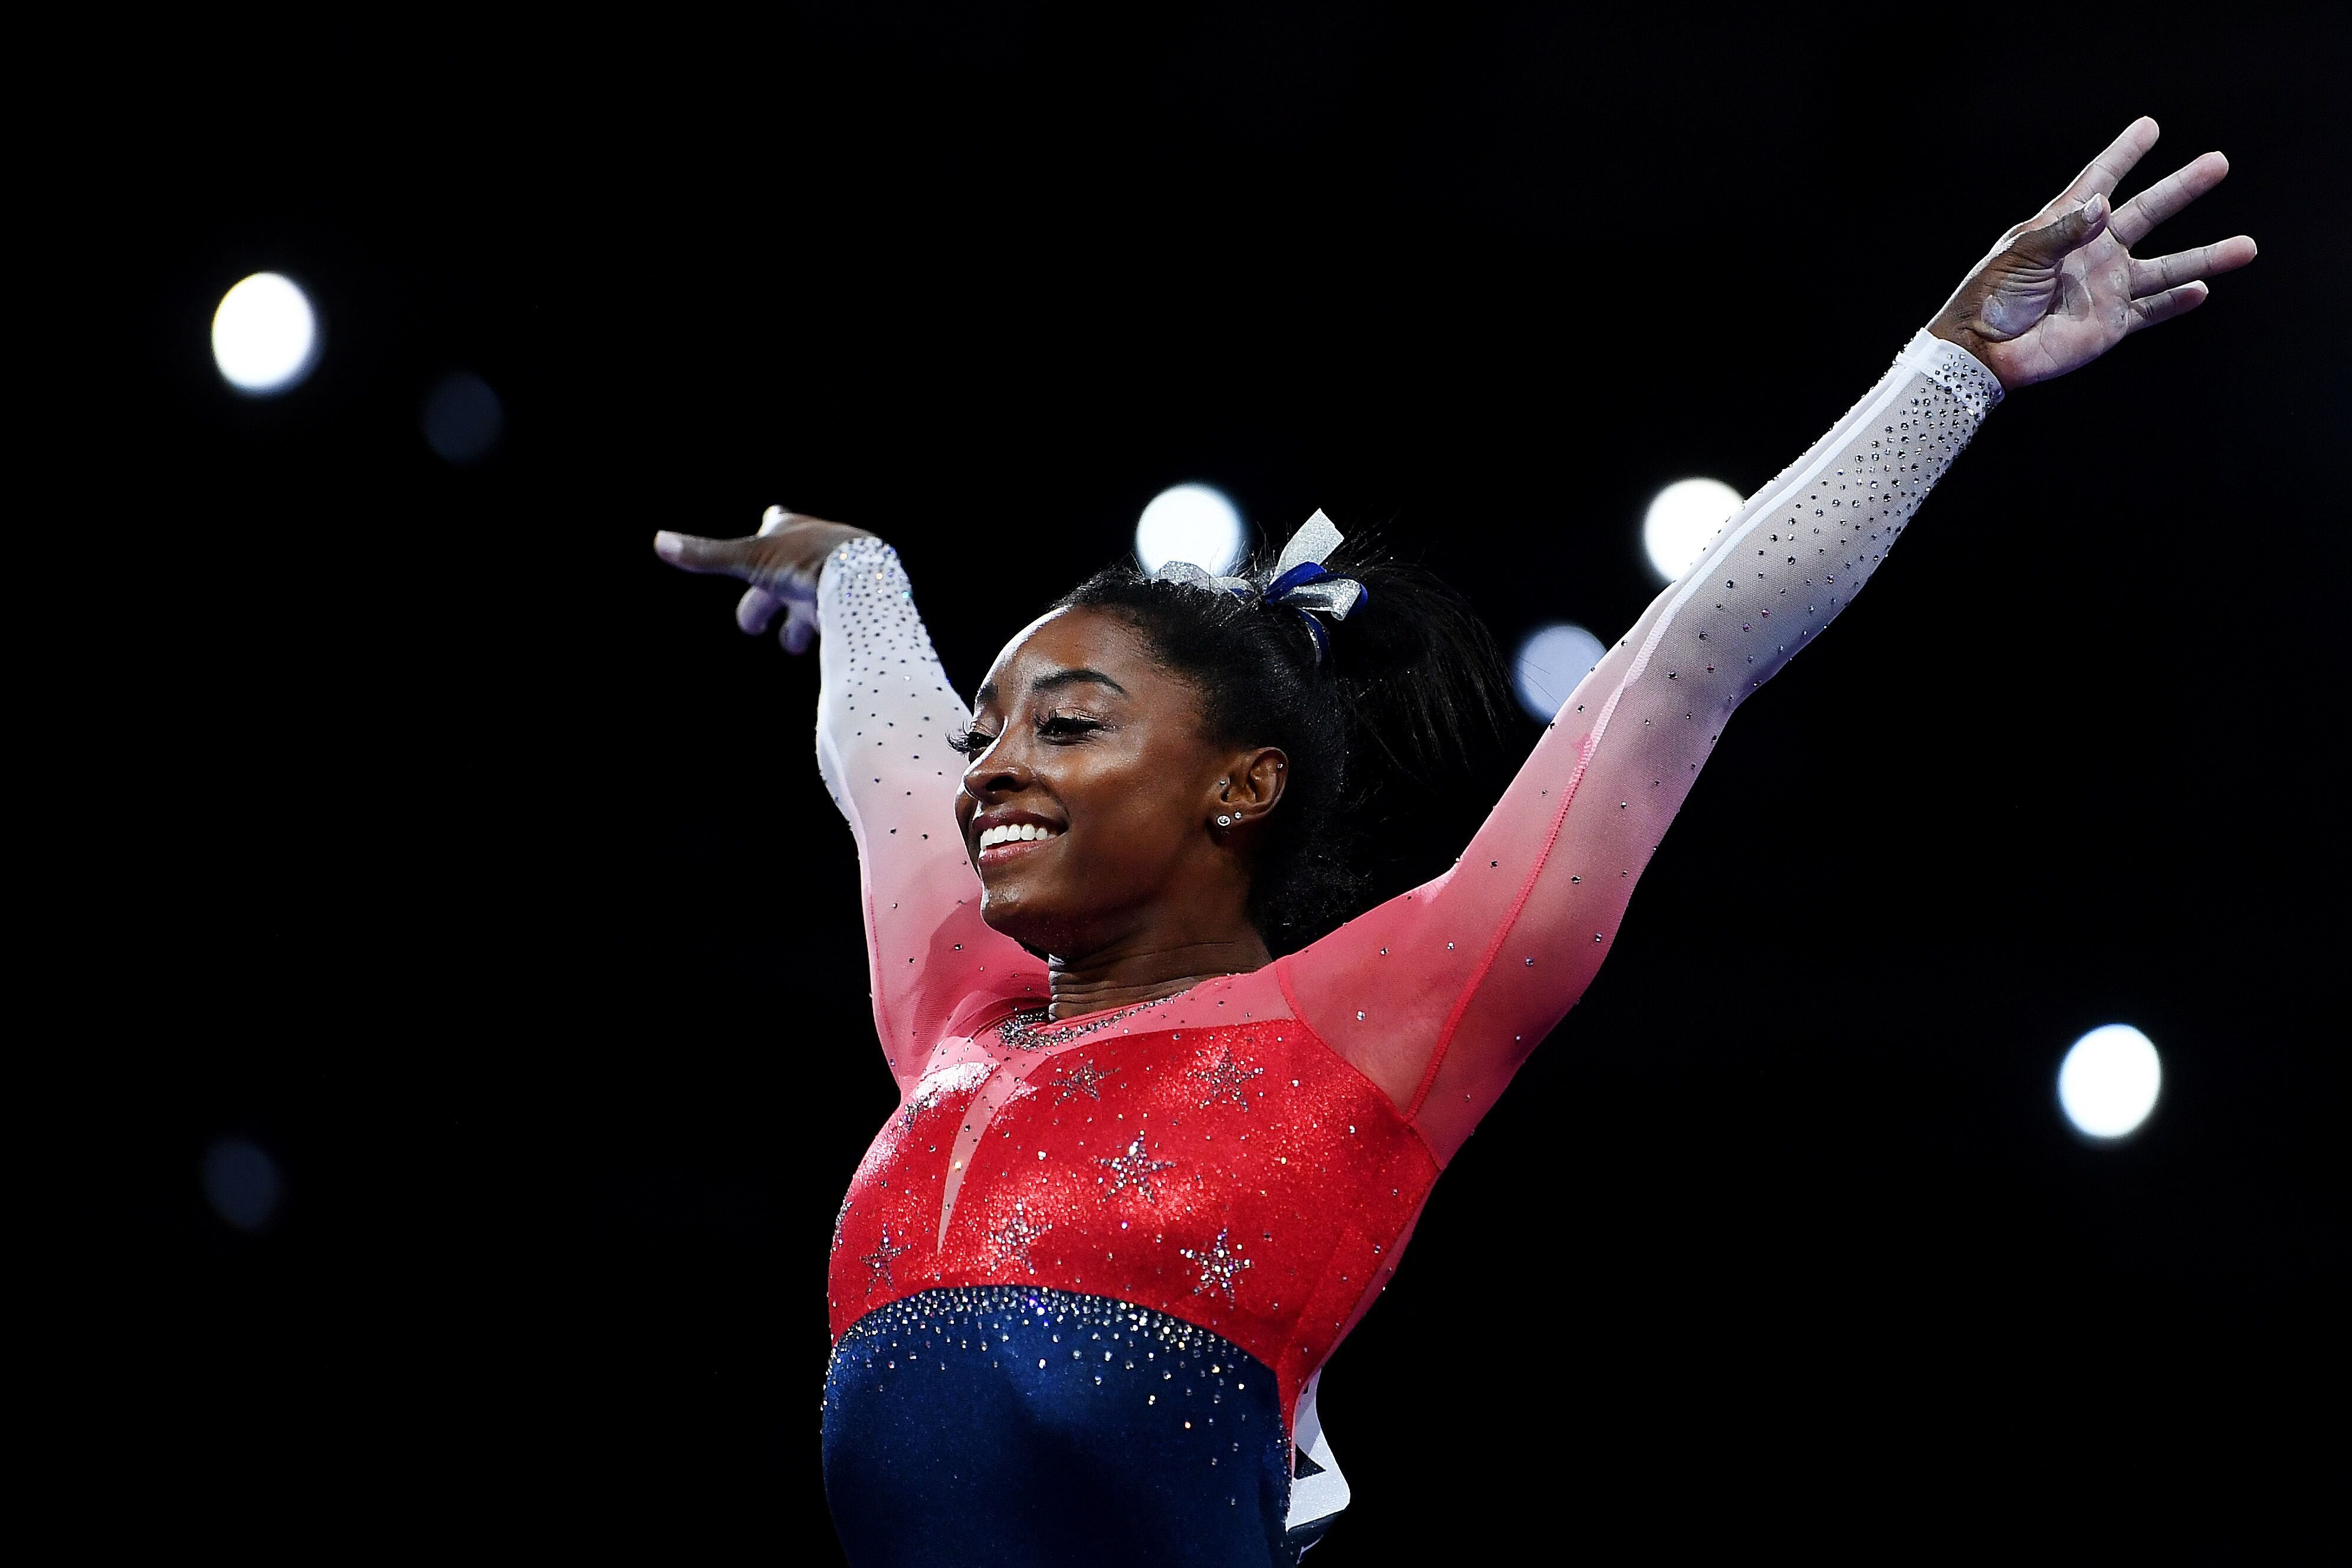 Simone Biles during the FIG Artistic Gymnastics World Championships on October 08, 2019. | Source: Getty Images